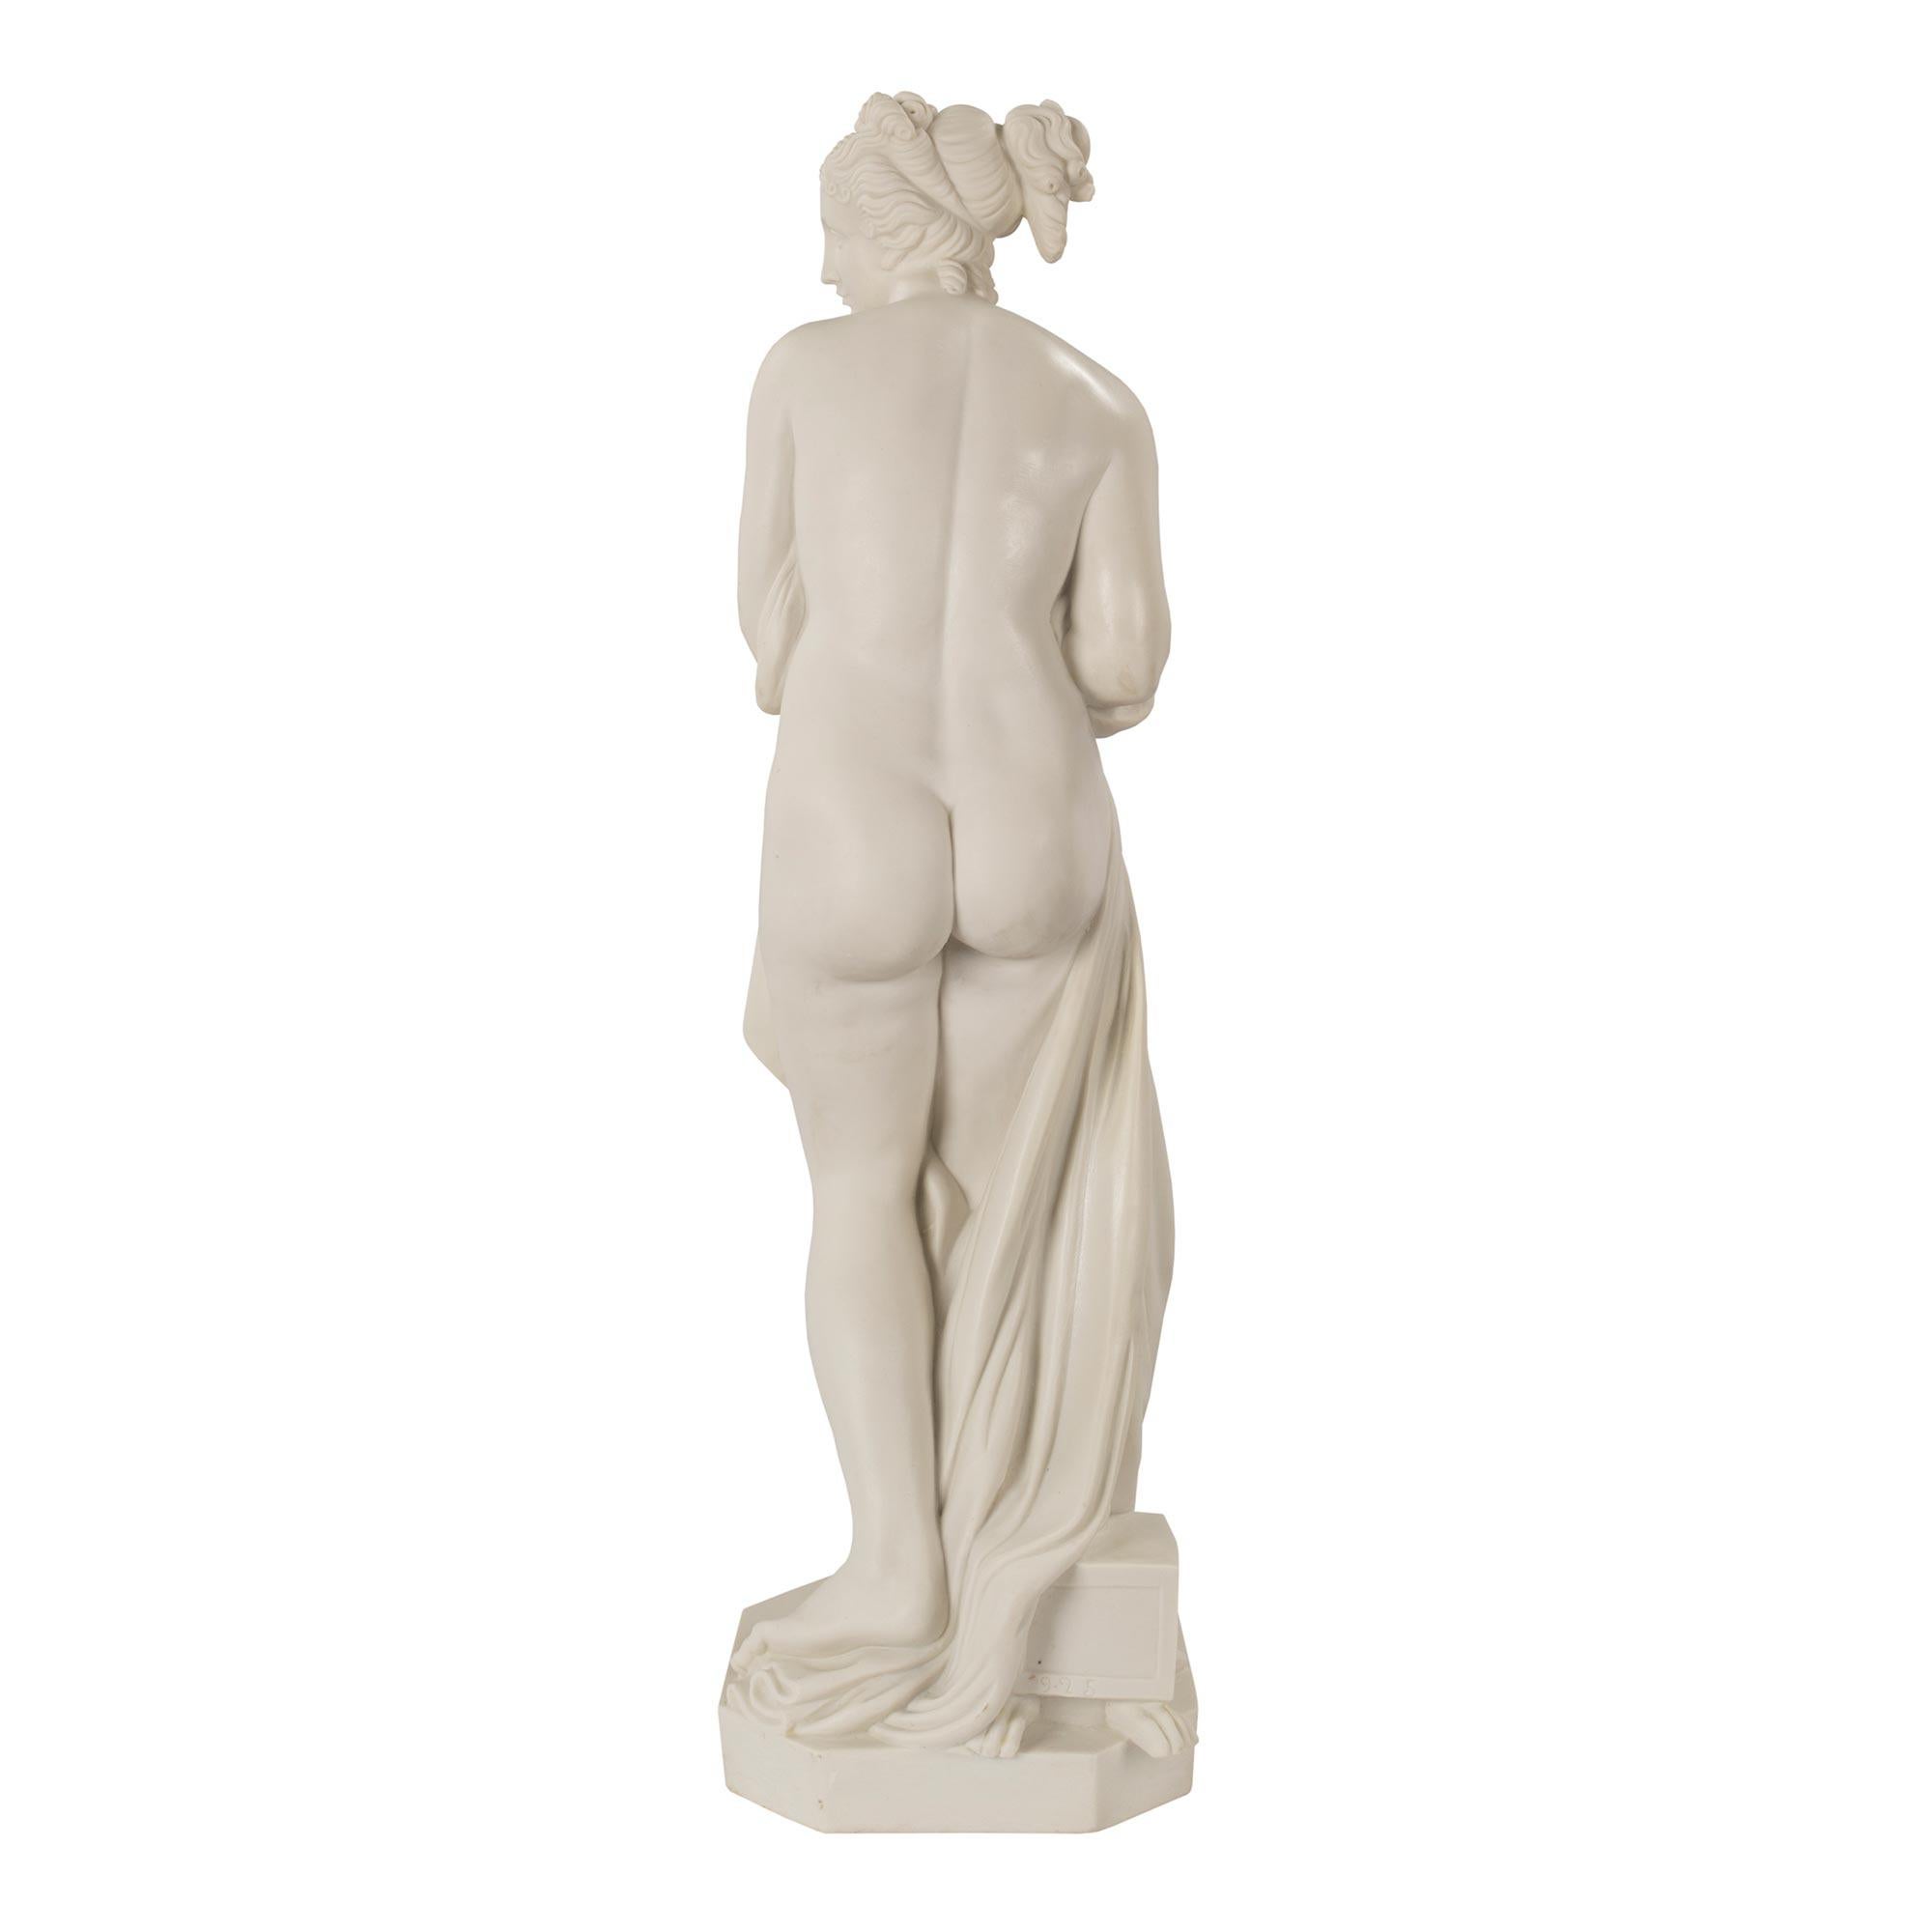 Italian 19th Century Neoclassical Style Biscuit de Sèvres Statue of Venus In Good Condition For Sale In West Palm Beach, FL